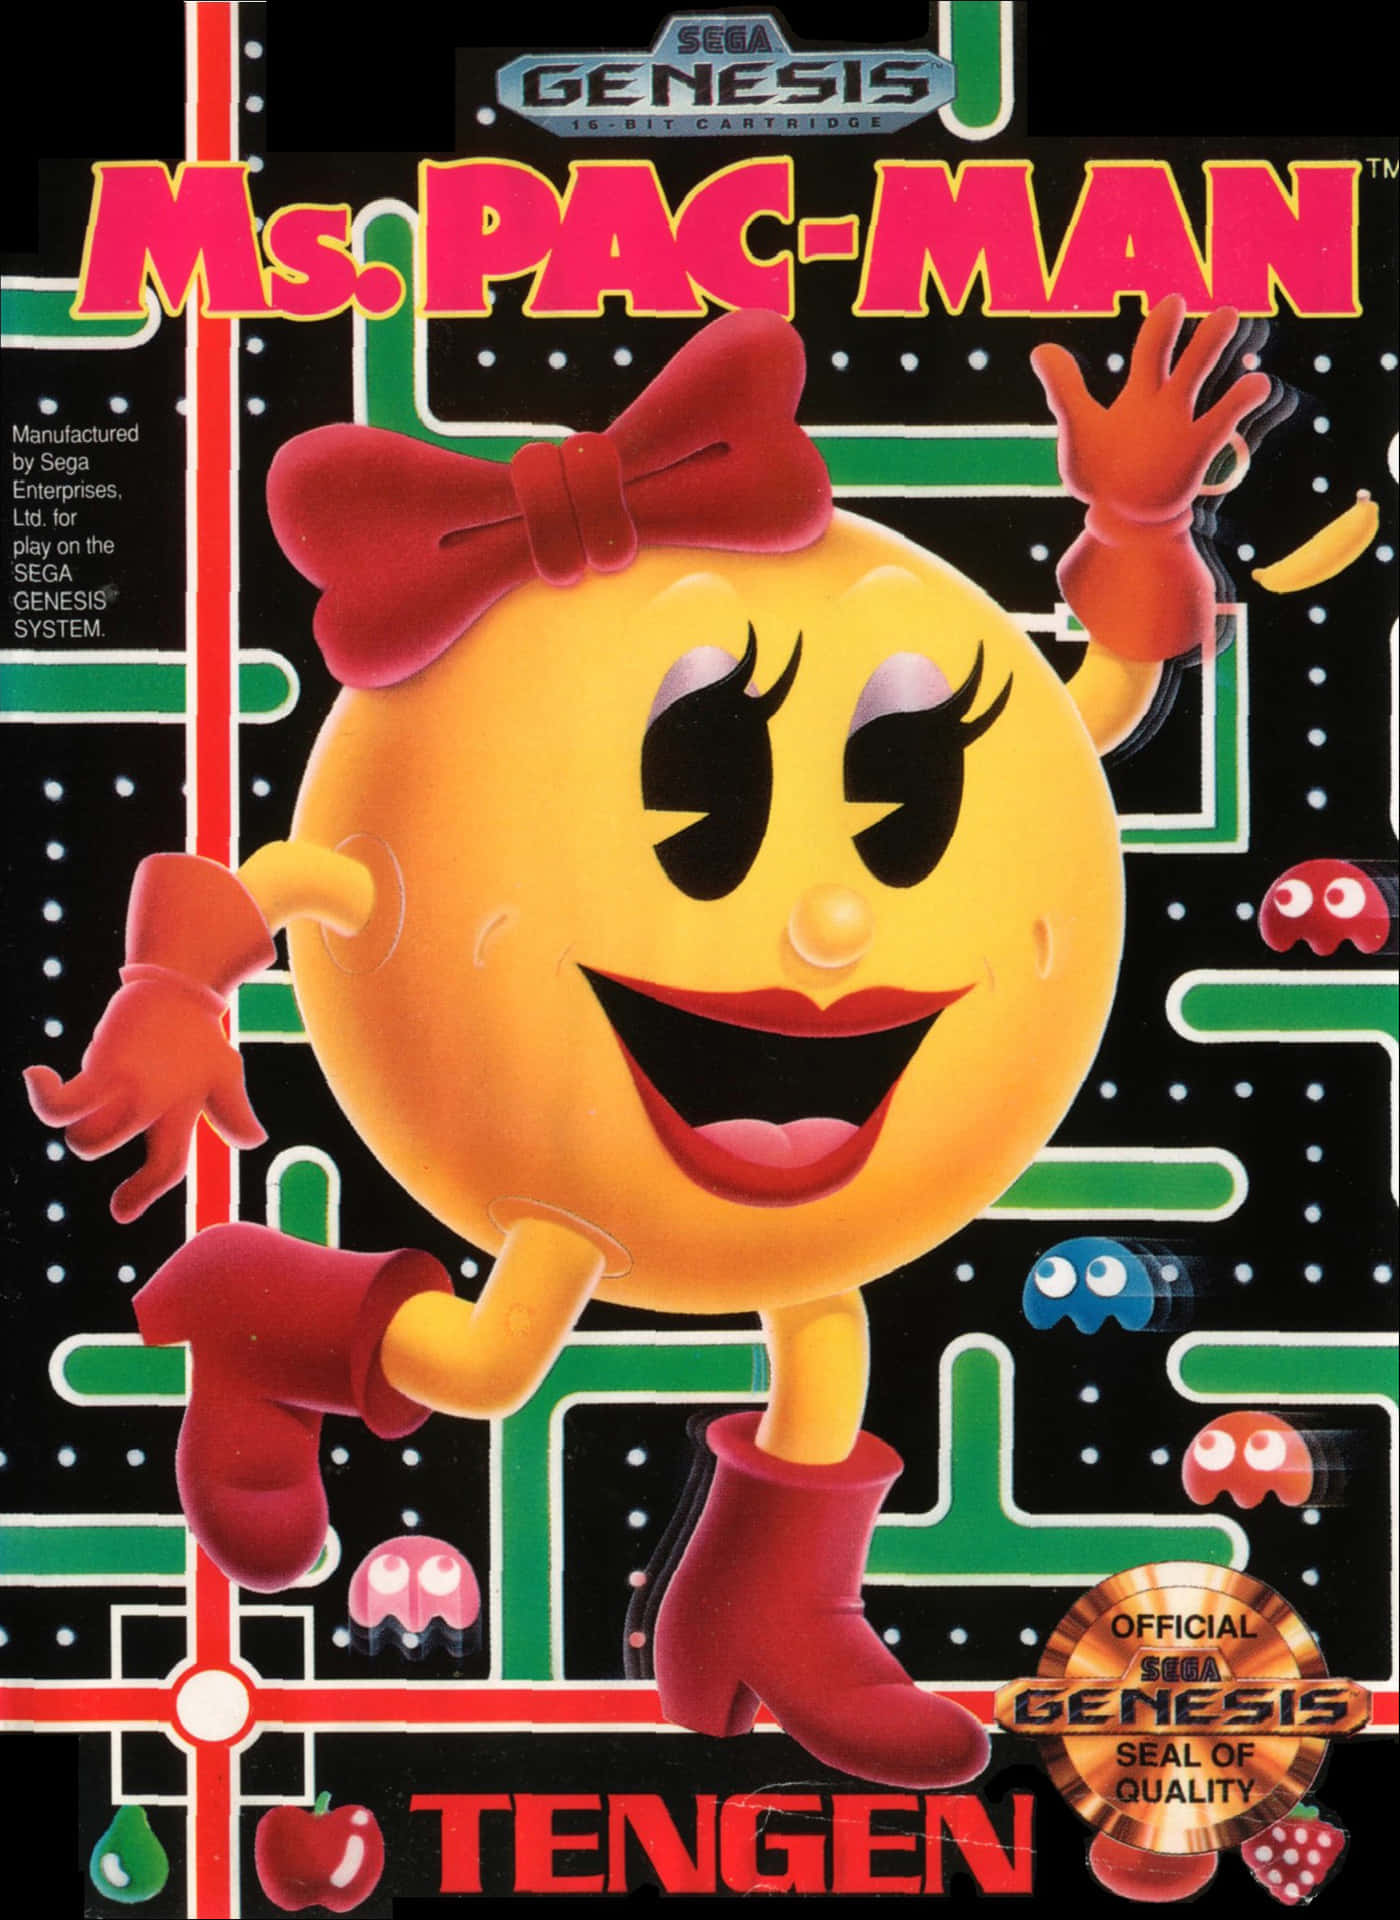 Classic Pac-Man chasing ghosts in a colorful maze